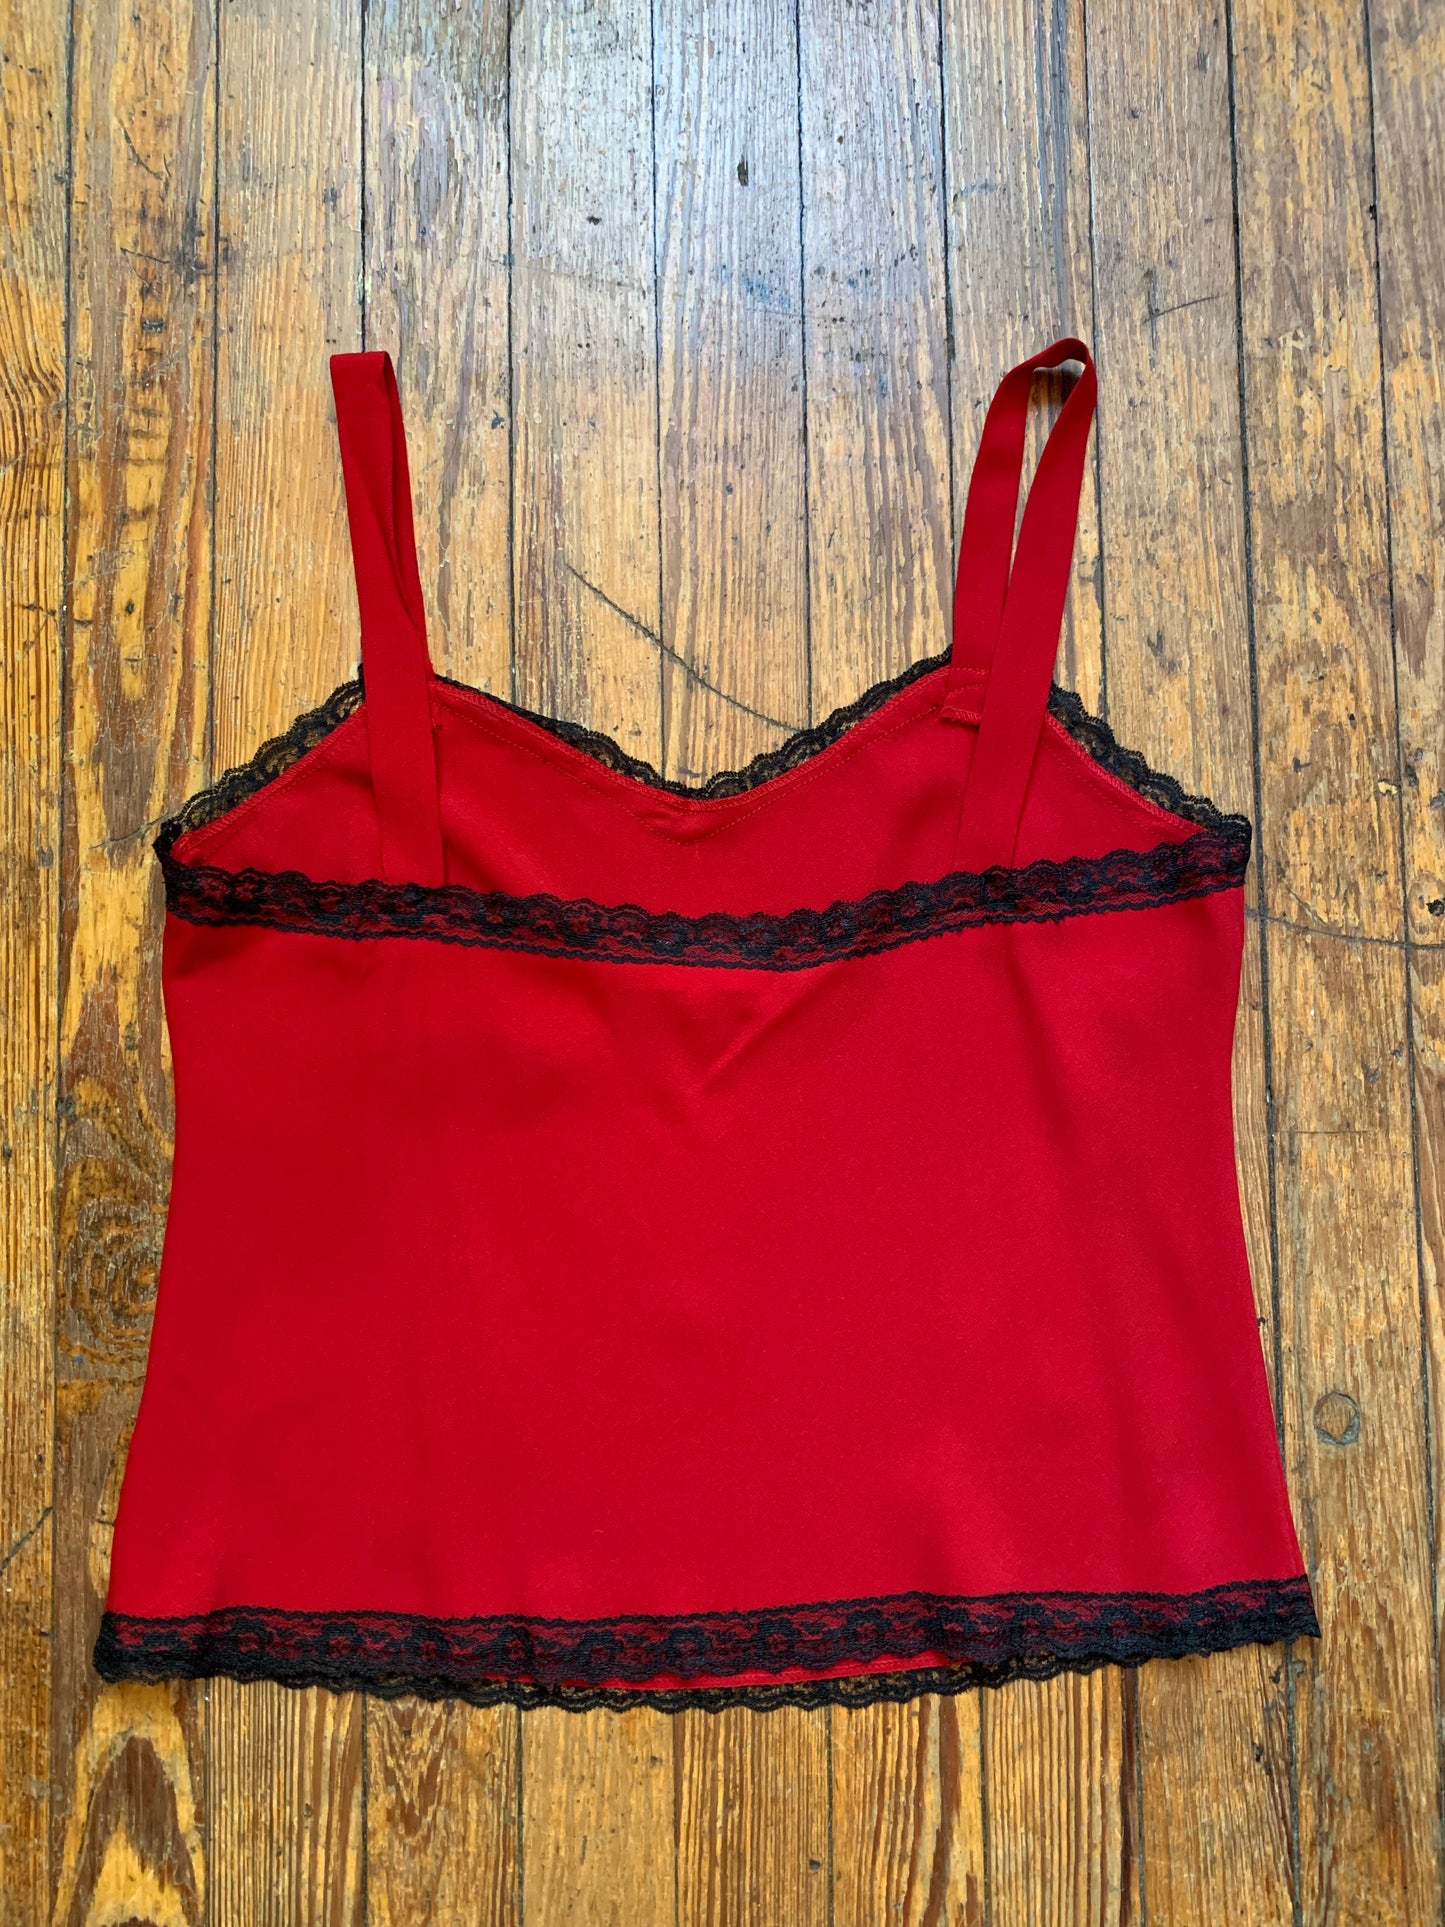 Red and Black Lace Trim Tank Top